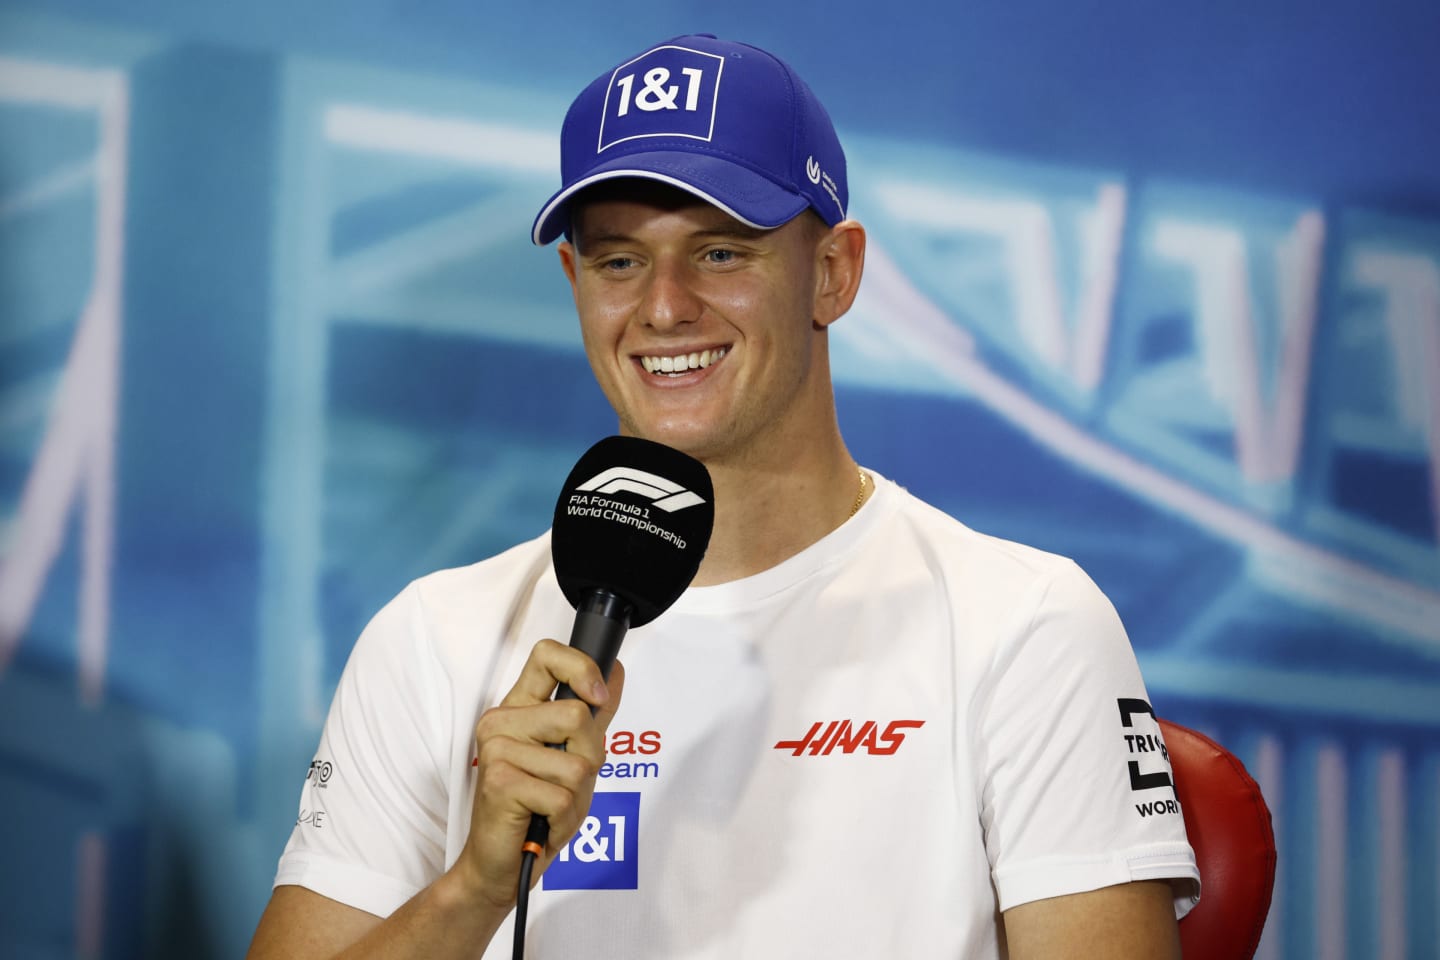 MIAMI, FLORIDA - MAY 06: Mick Schumacher of Germany and Haas F1 talks in the Drivers Press Conference prior to practice ahead of the F1 Grand Prix of Miami at the Miami International Autodrome on May 06, 2022 in Miami, Florida. (Photo by Jared C. Tilton/Getty Images)